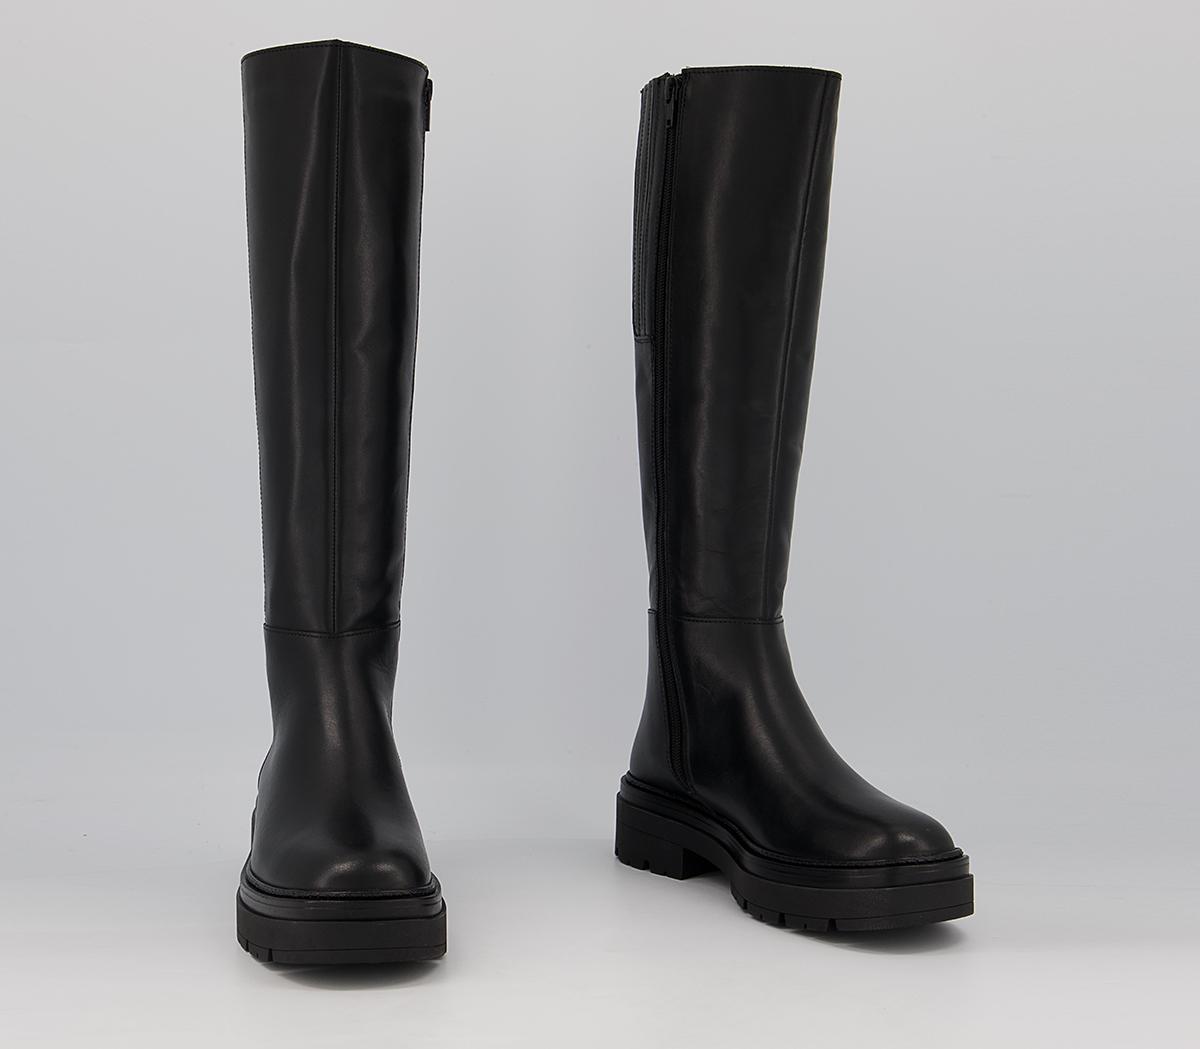 OFFICE Keele Chunky Boots Black Leather - New Season Boots